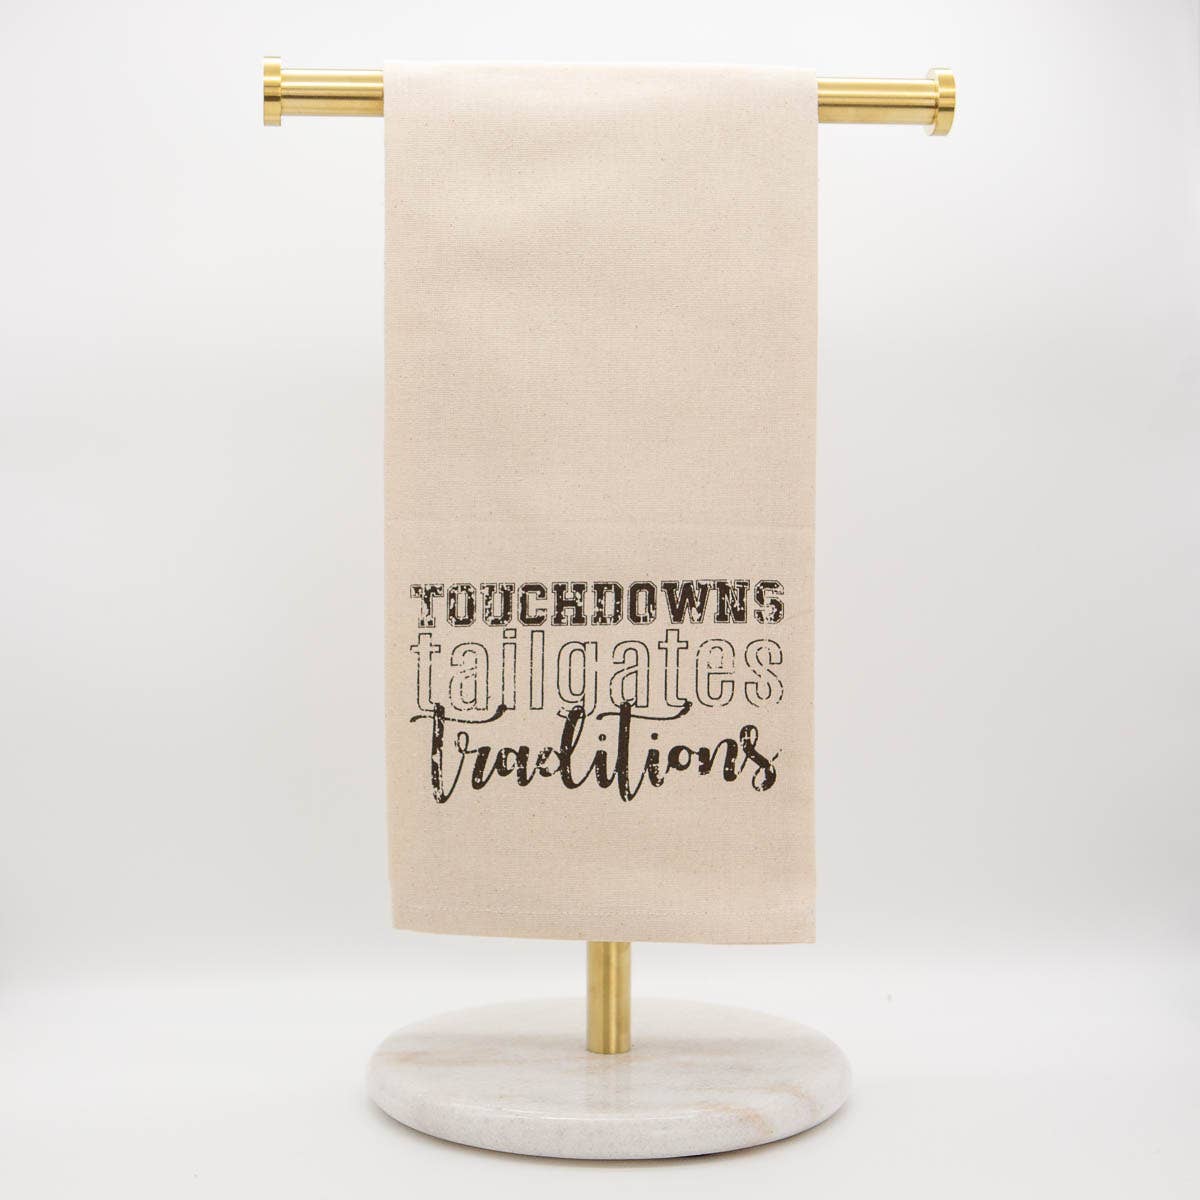 Touchdowns Tailgates Traditions Hand Towel   Oat/Black  20x28